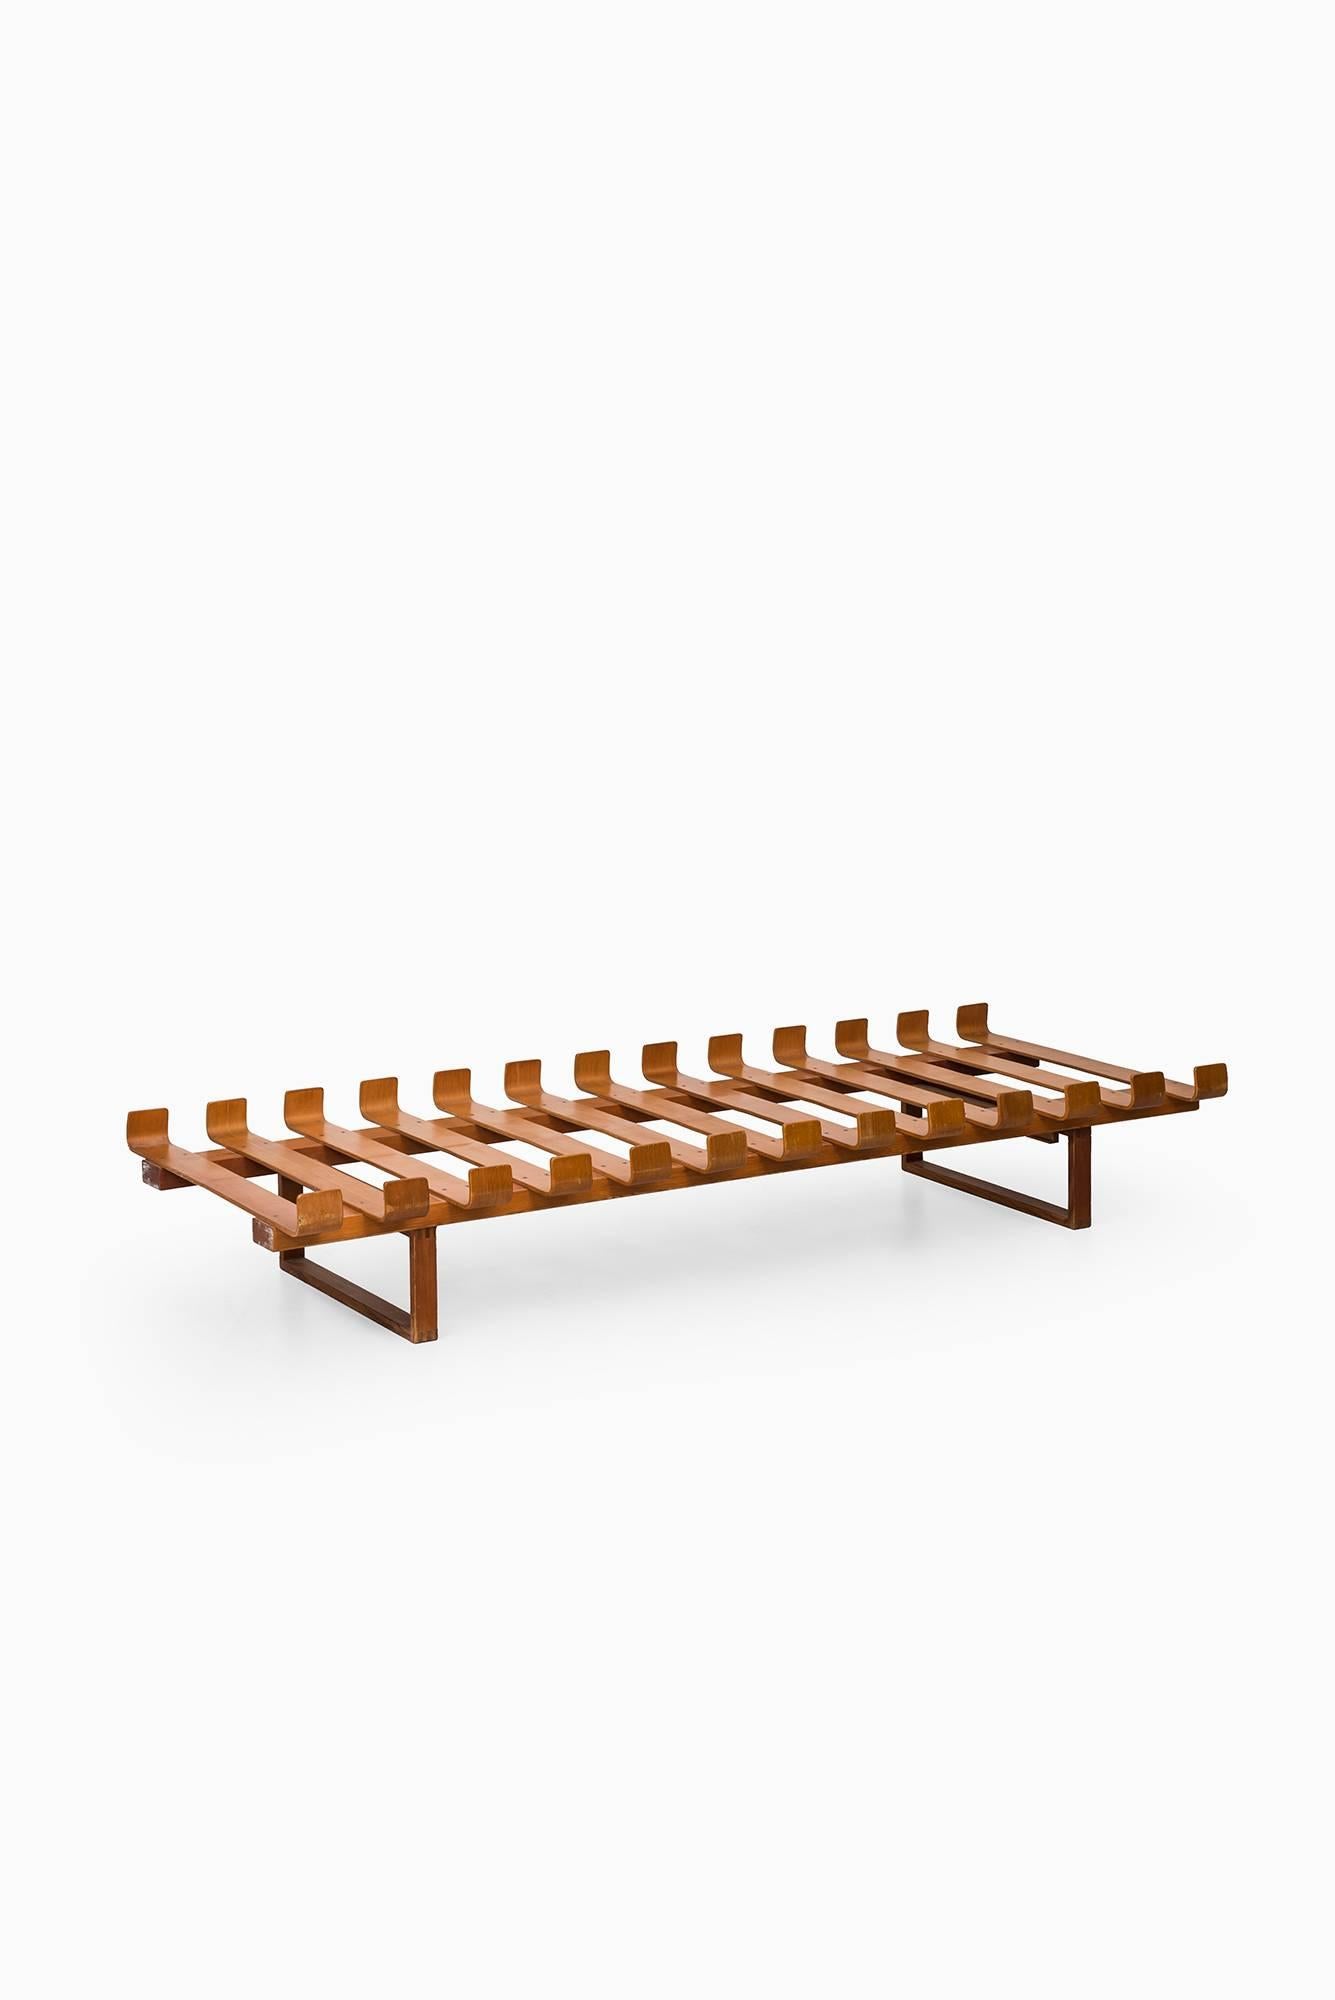 Fabric Daybed in Oregon Pine Probably Produced in Denmark